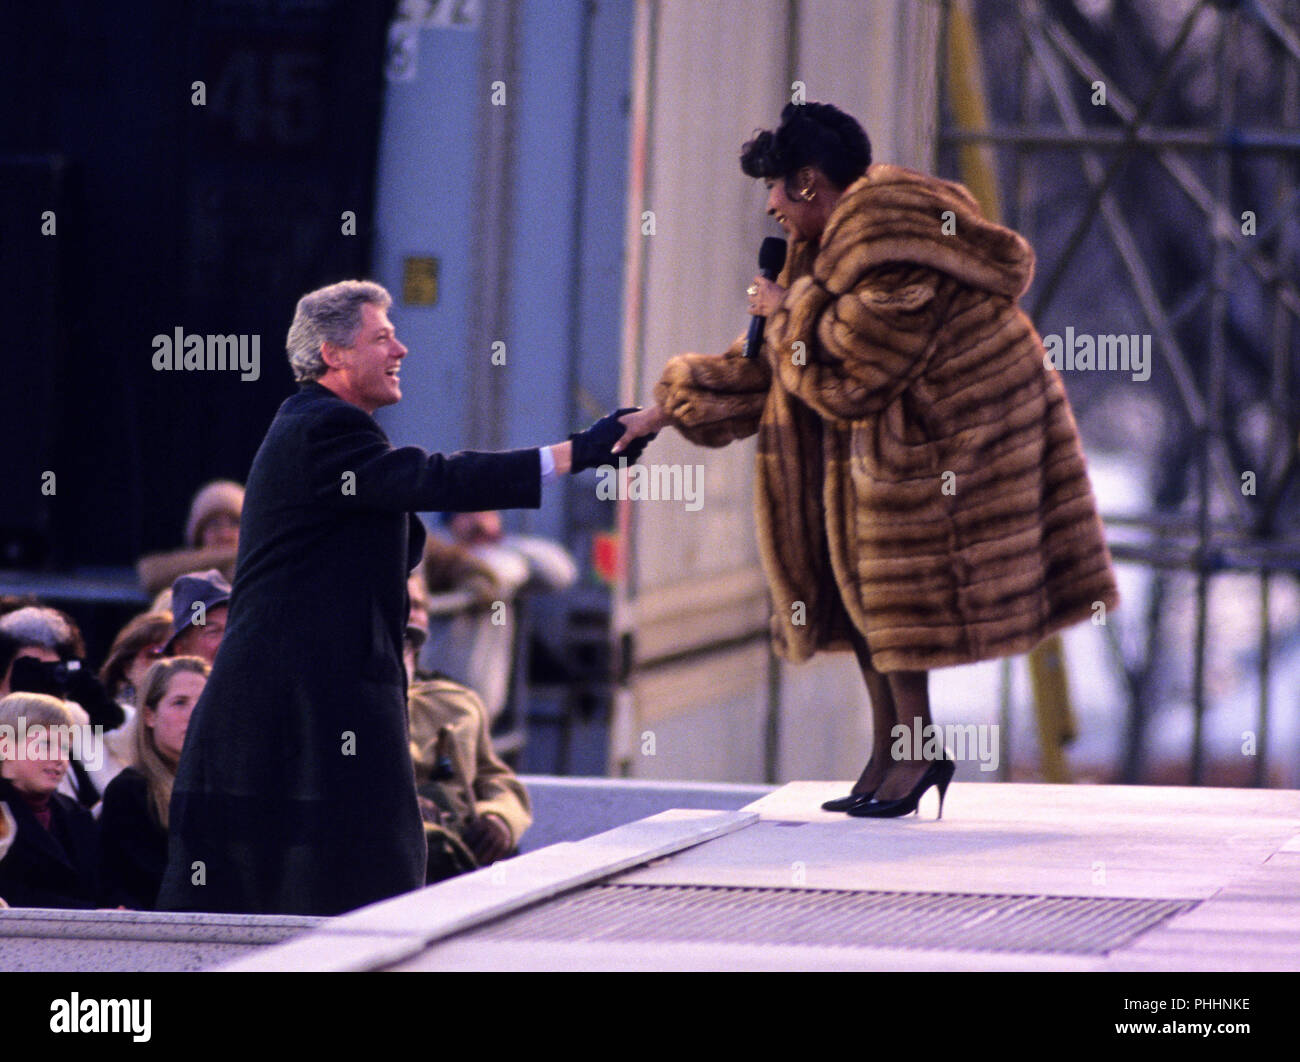 Washington, District of Columbia, USA. 17th Jan, 1993. United States President-elect Bill Clinton shakes hands with entertainer Aretha Franklin at the concert at the Lincoln Memorial that was part of the ''American Reunion'' celebration on the National Mall on January 17, 1993 Credit: Howard L. Sachs/CNP/ZUMA Wire/Alamy Live News Stock Photo